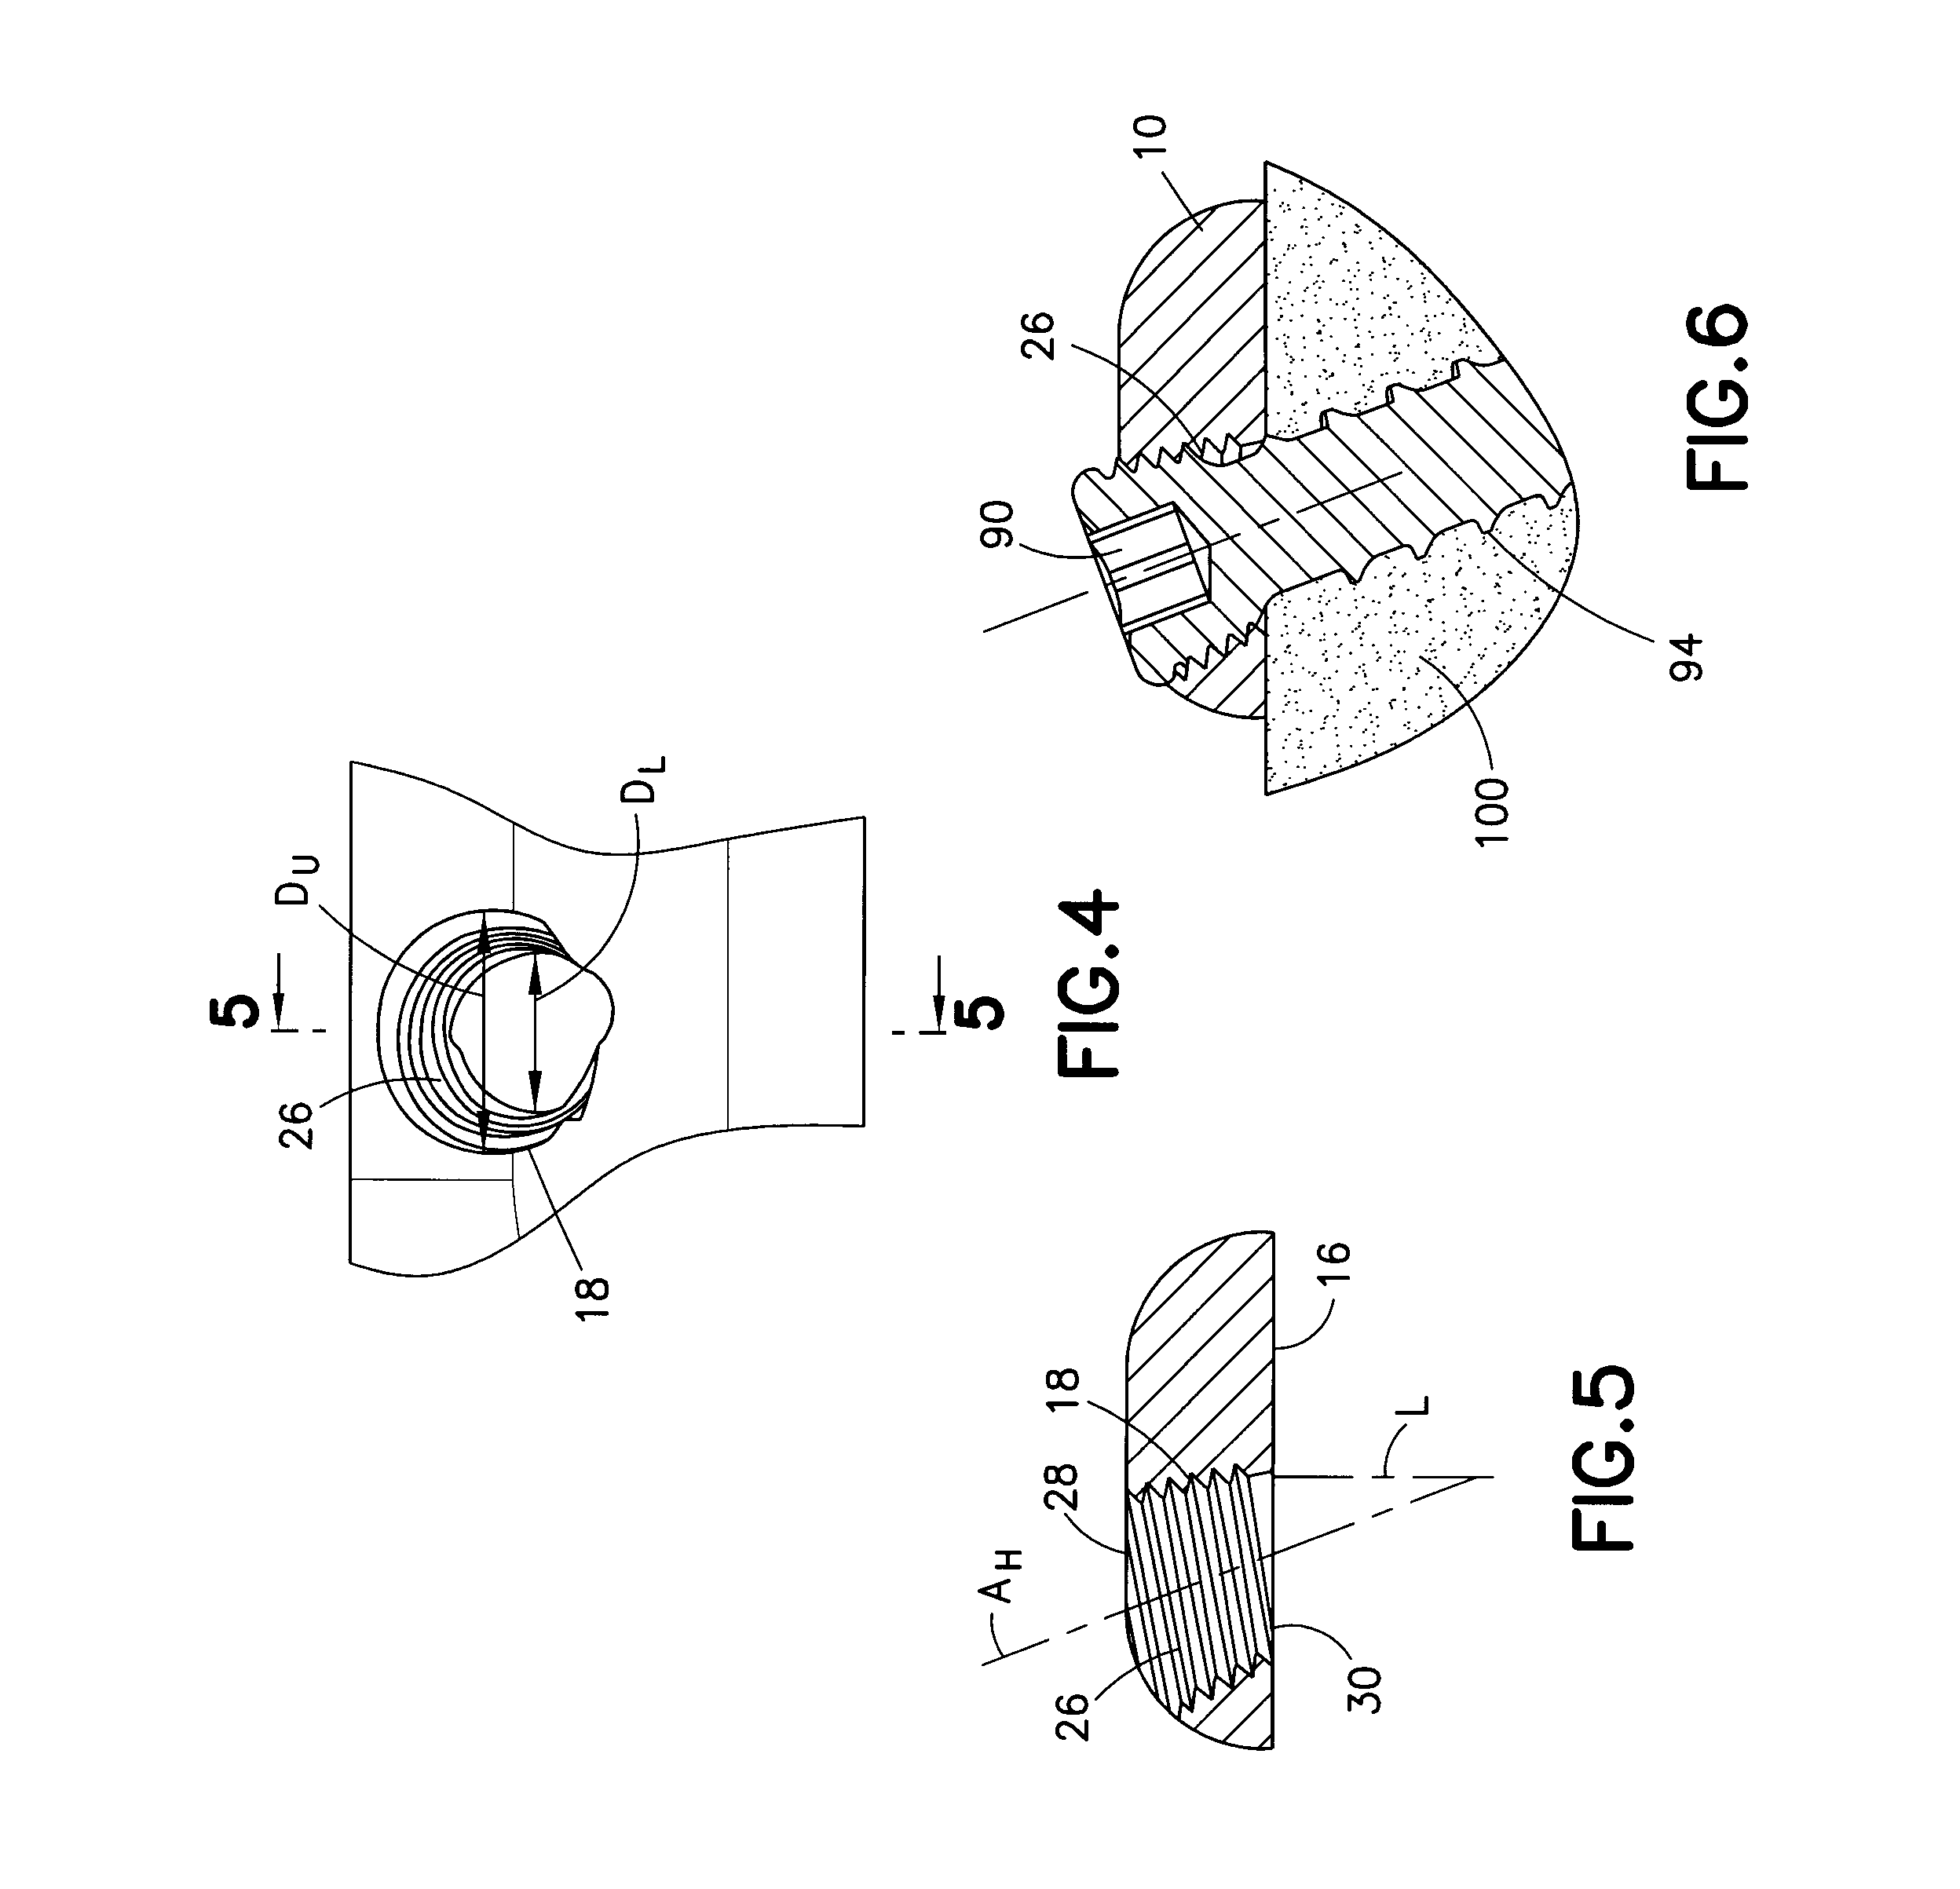 Reduced component bone plating system